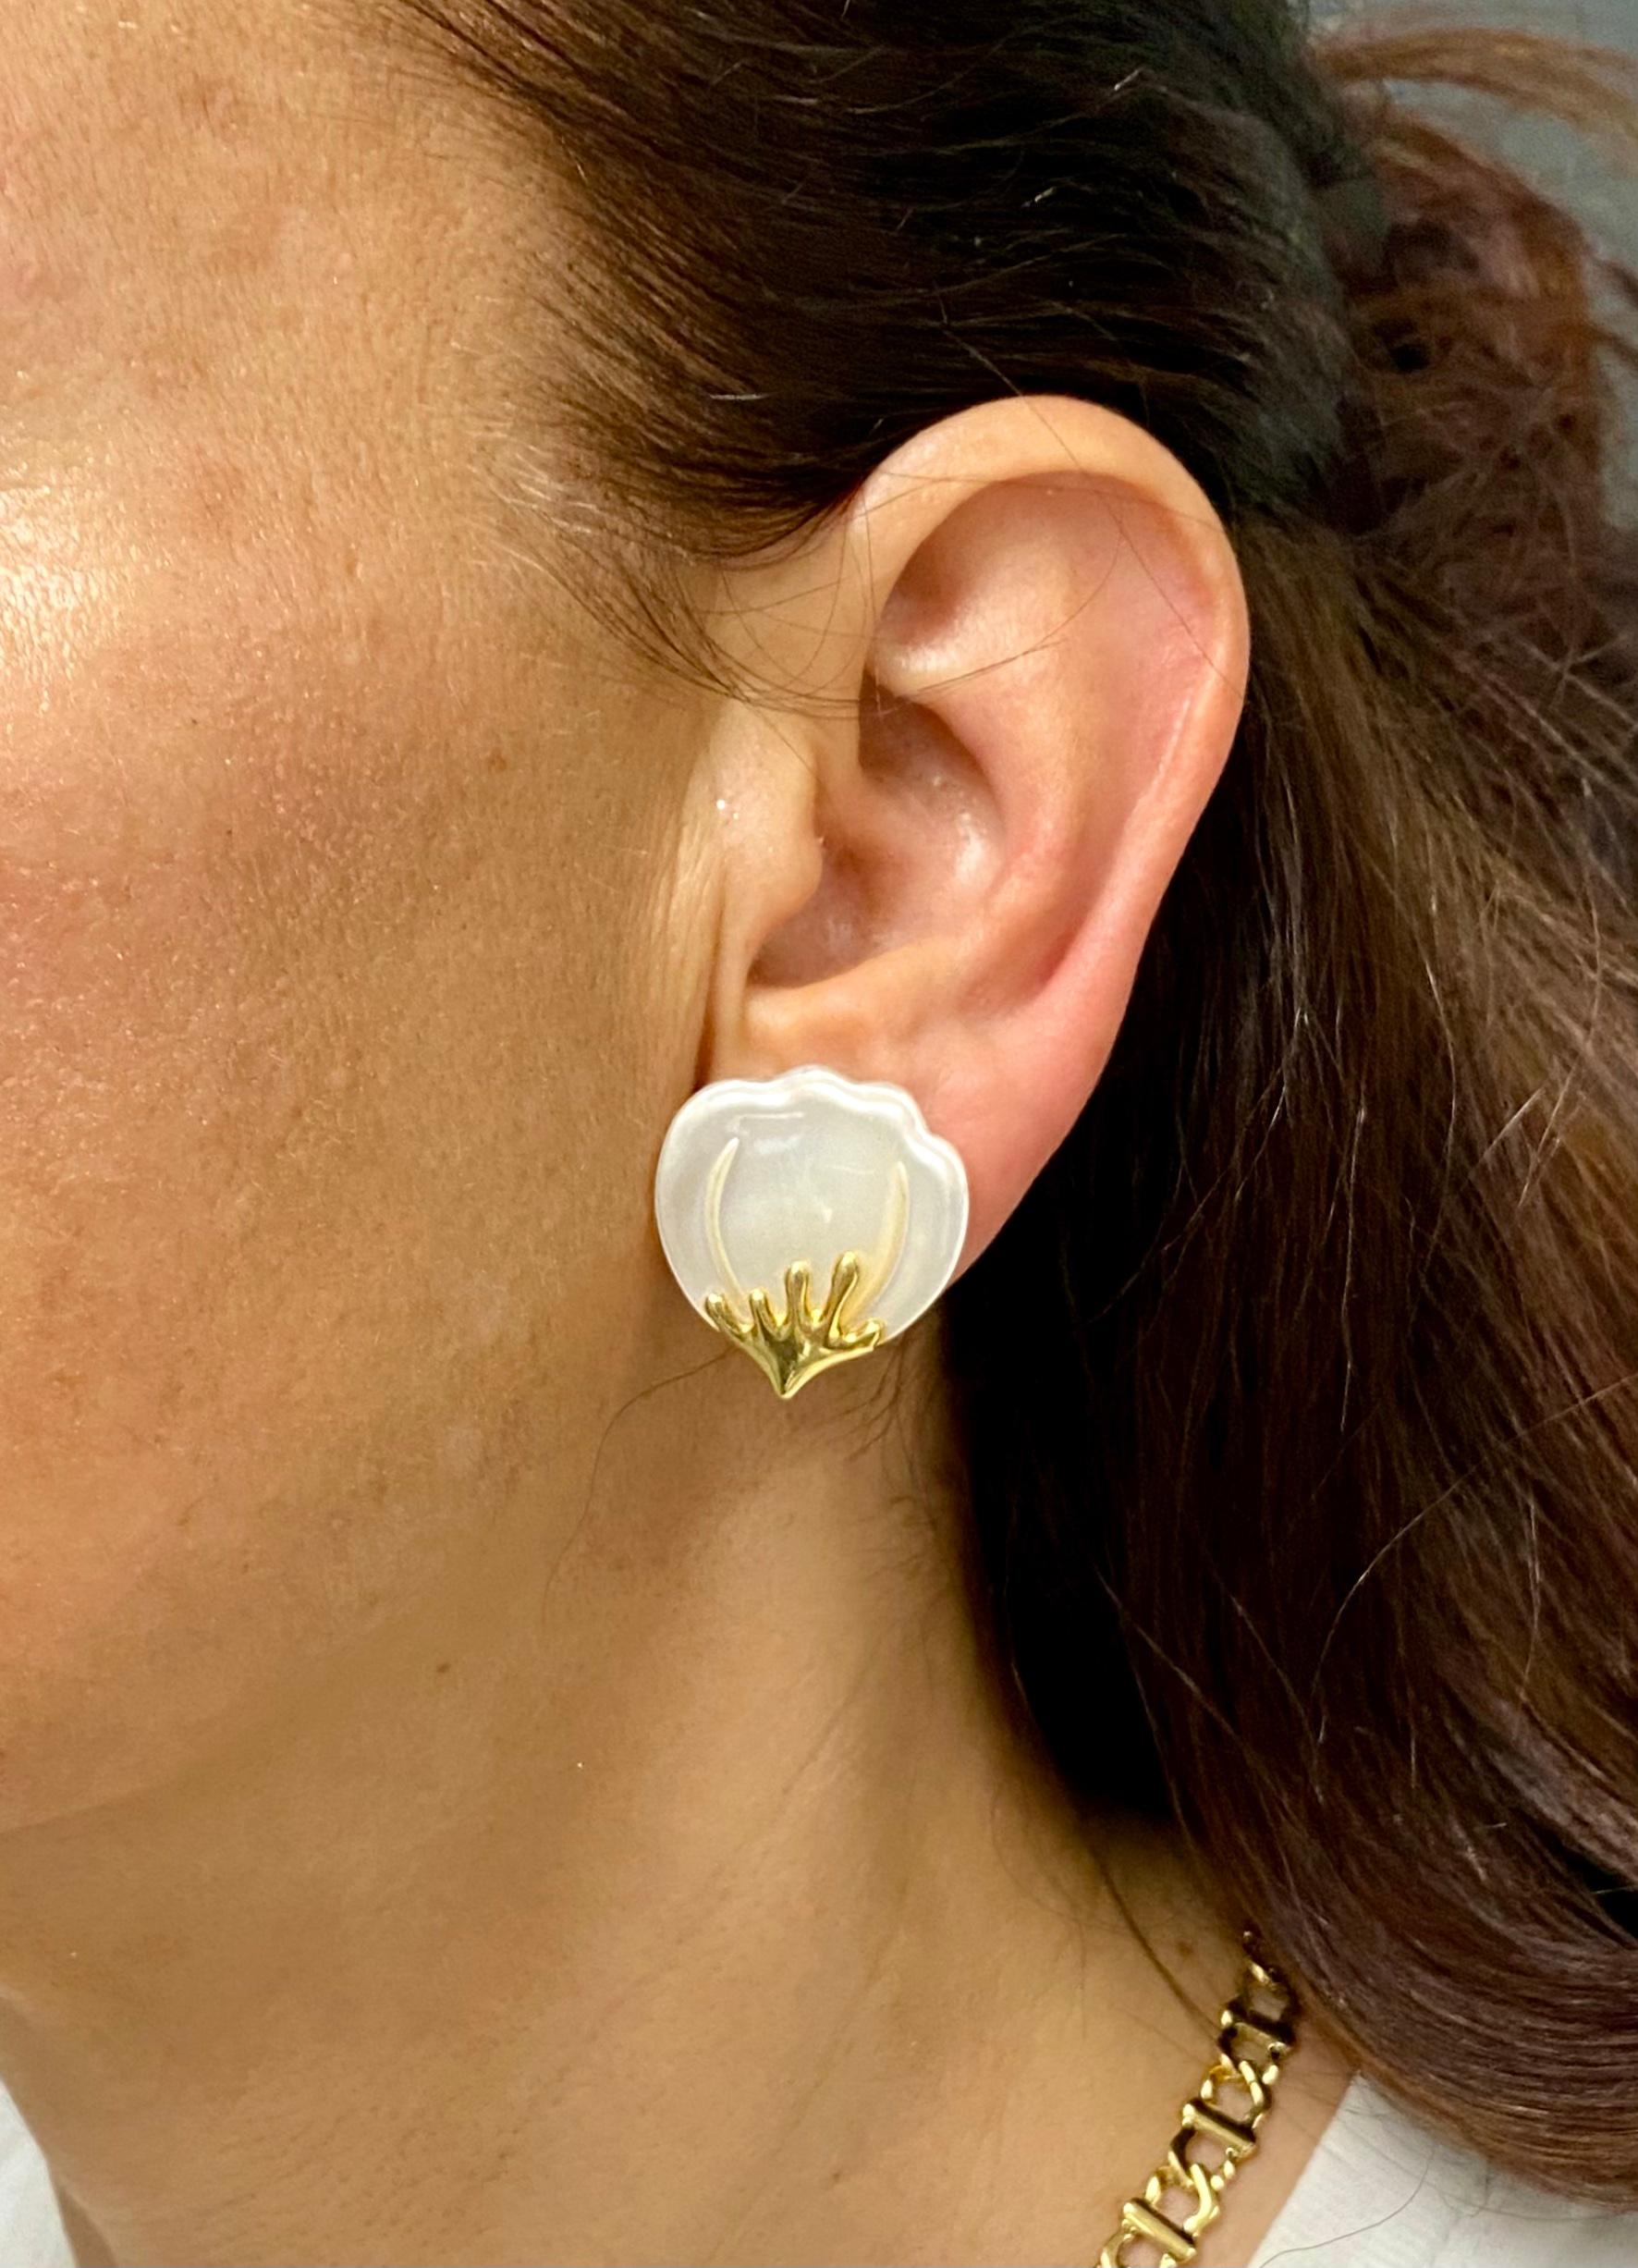 DESIGNER: Angela Cummings for Tiffany & Co.
CIRCA: Late 20th Century
MATERIALS: 18K Yellow Gold
GEMSTONE: Mother of Pearl
WEIGHT: 14.1 grams
MEASUREMENT: 15/16